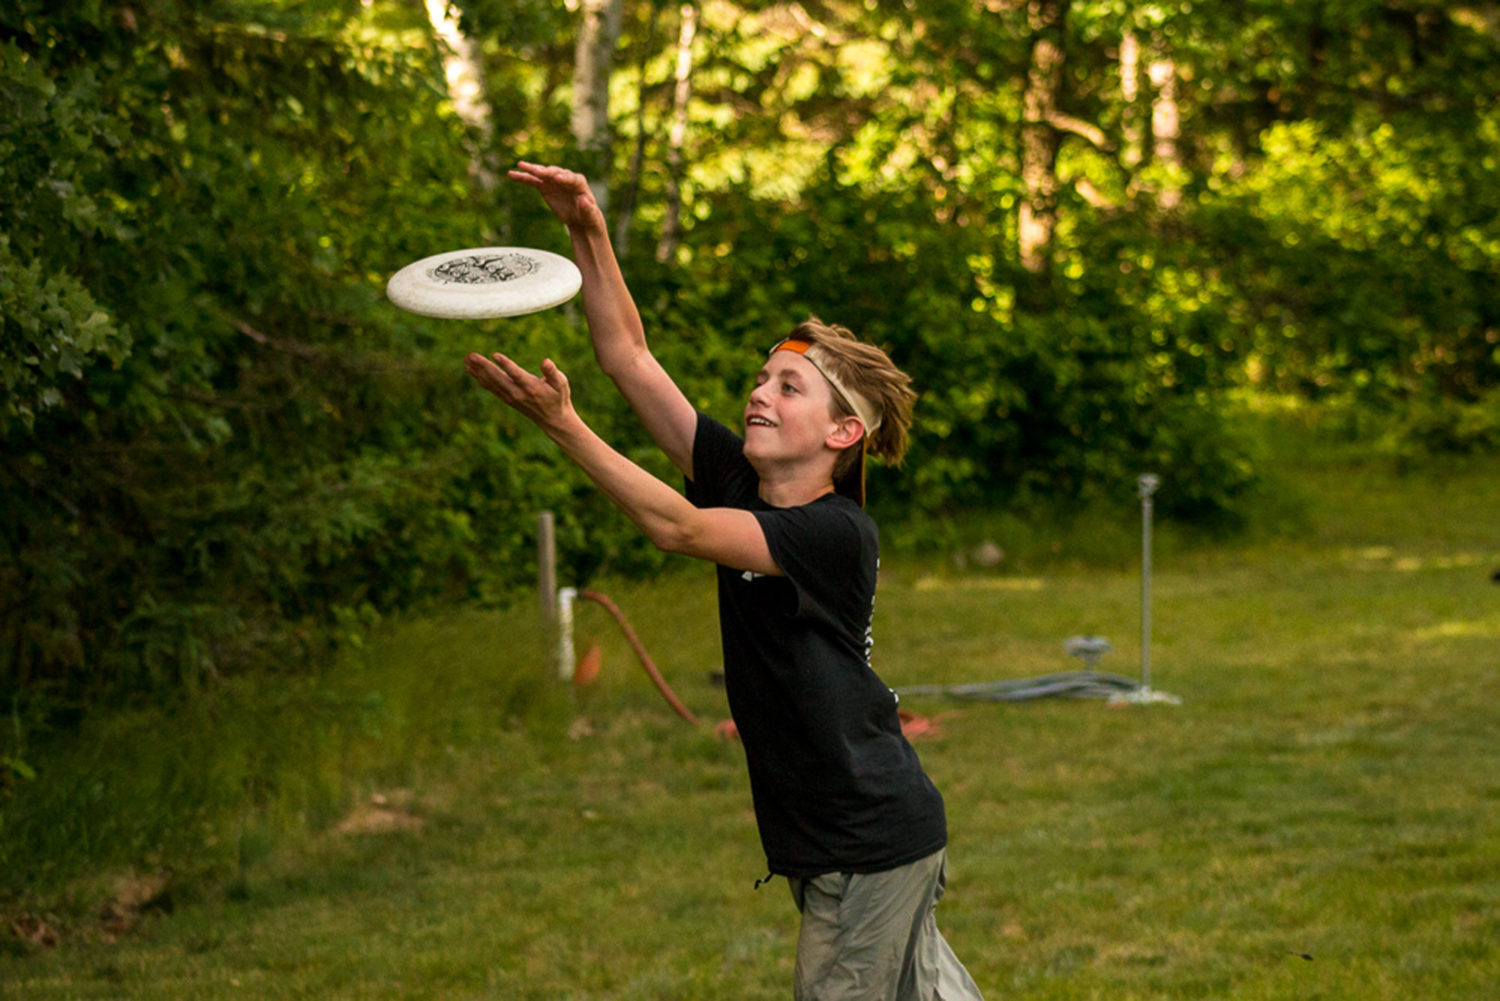 Boy at camp catching a Frisbee